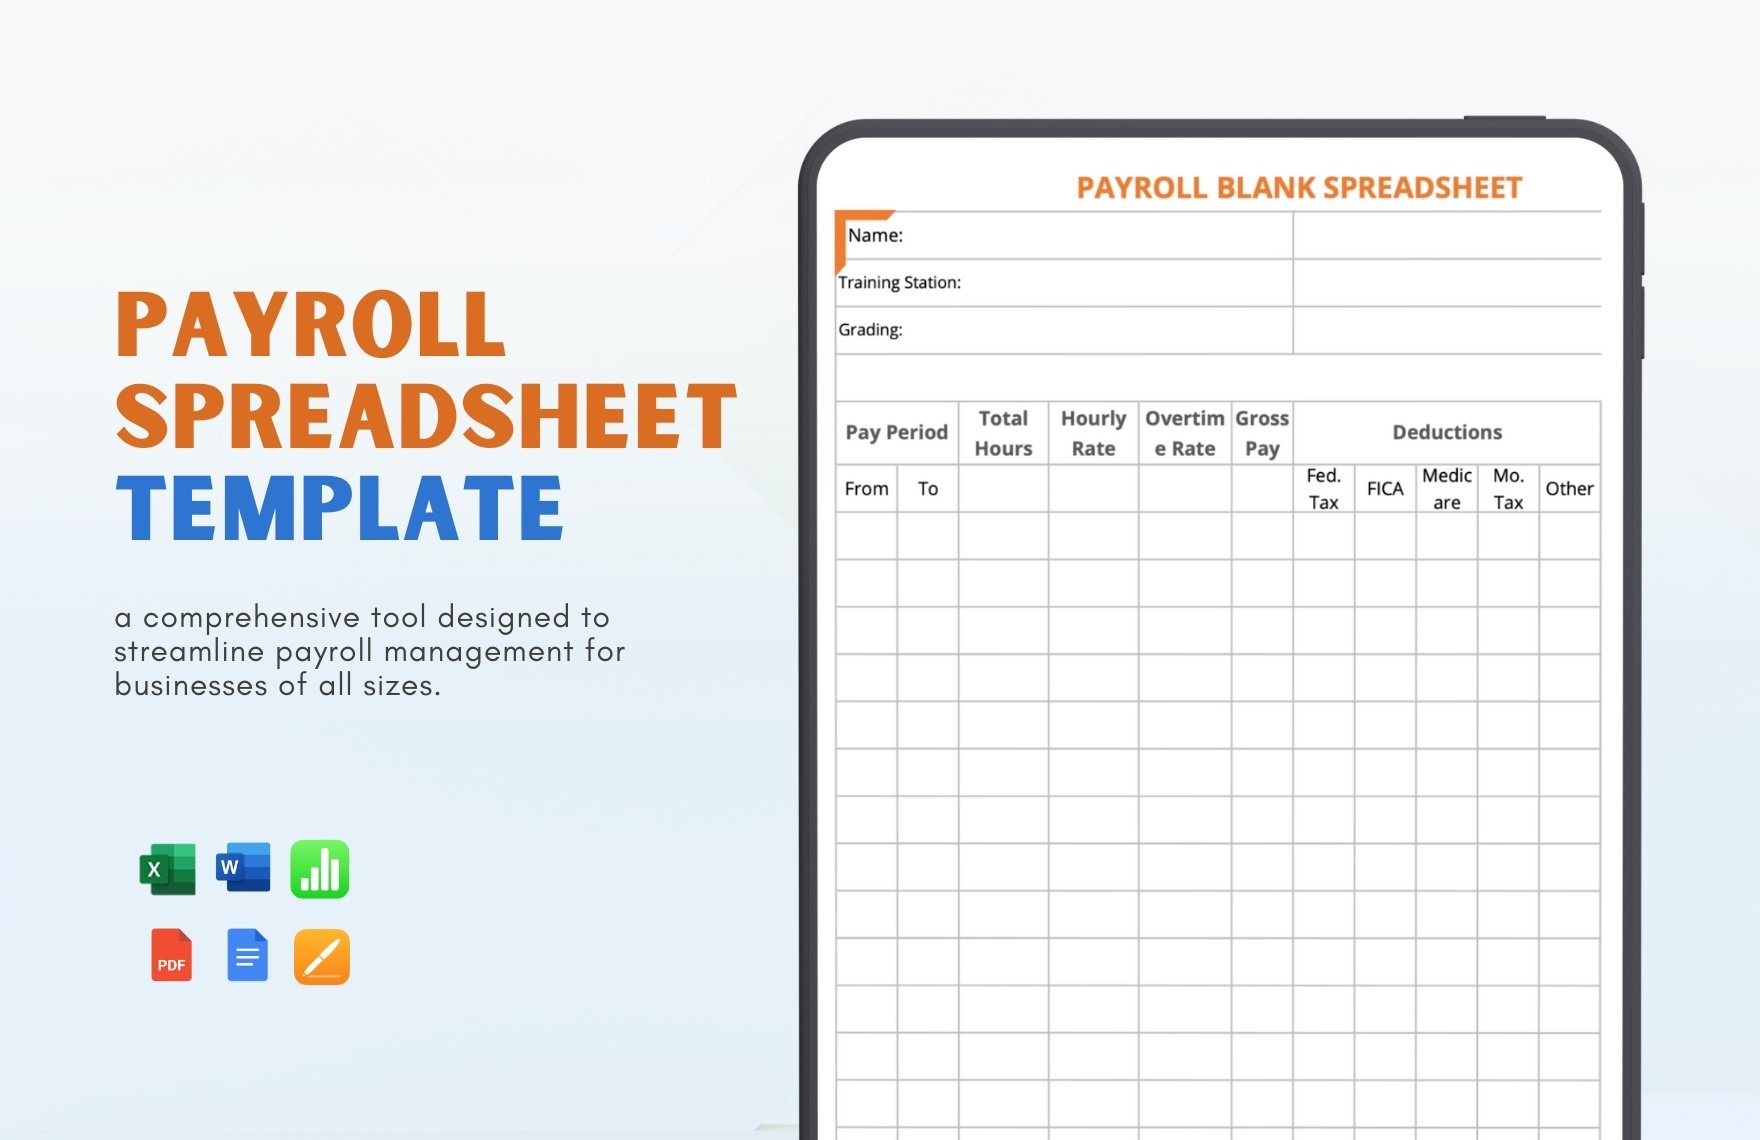 Payroll Accrual Spreadsheet Template in Word, Google Docs, Excel, Google Sheets, Apple Pages, Apple Numbers